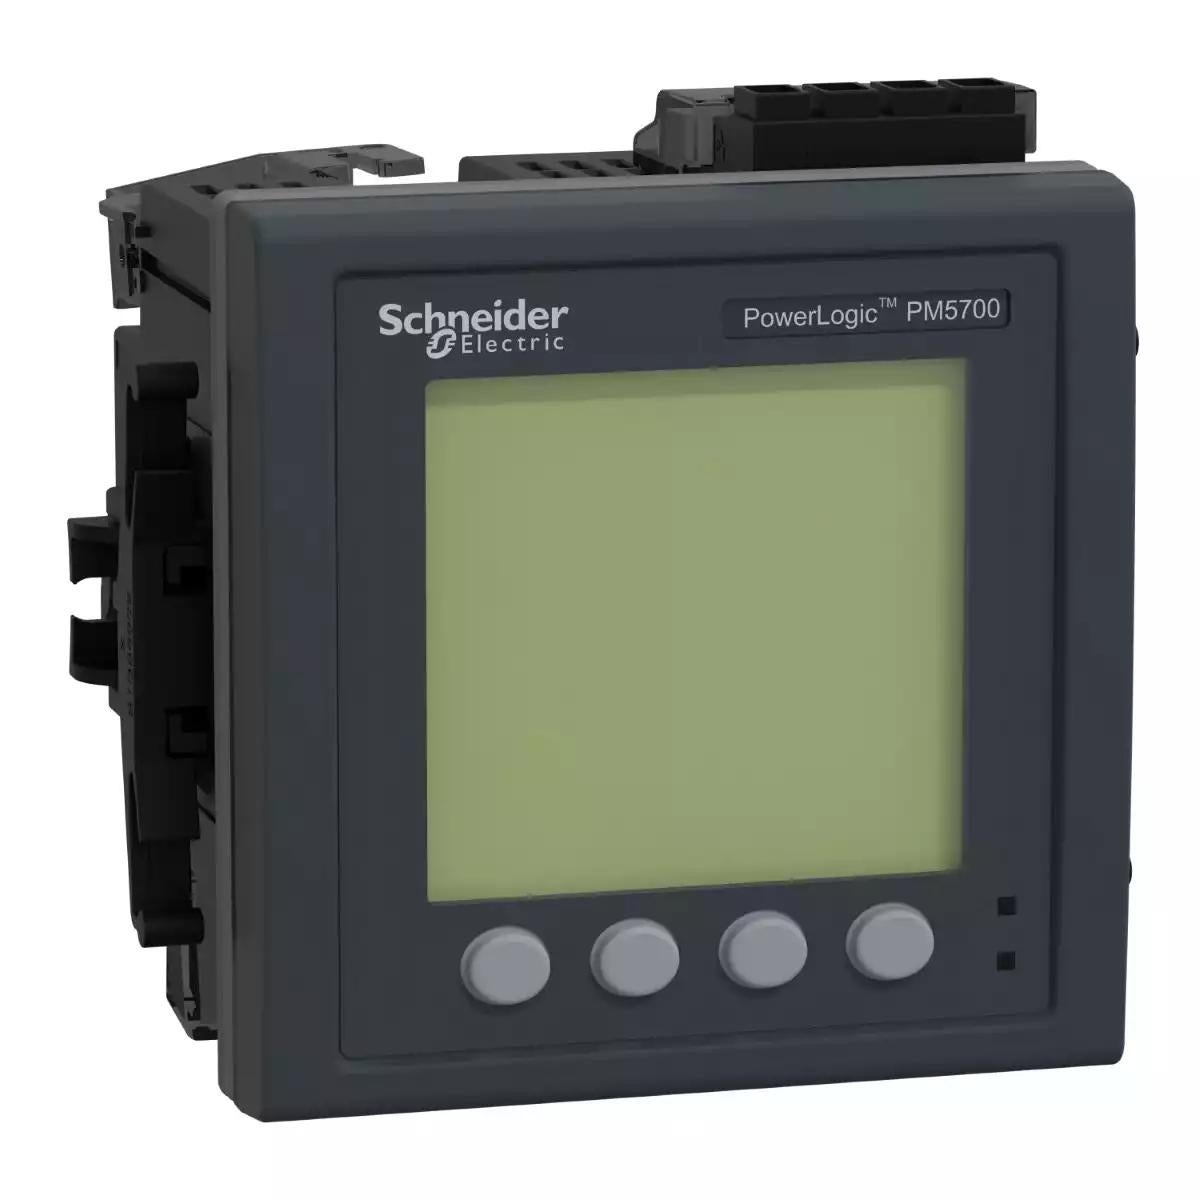 PM5760 Meter, 2 ethernet, up to 63th H, 1,1M, wave+RCM, 4DI/2DO 52 alarms 